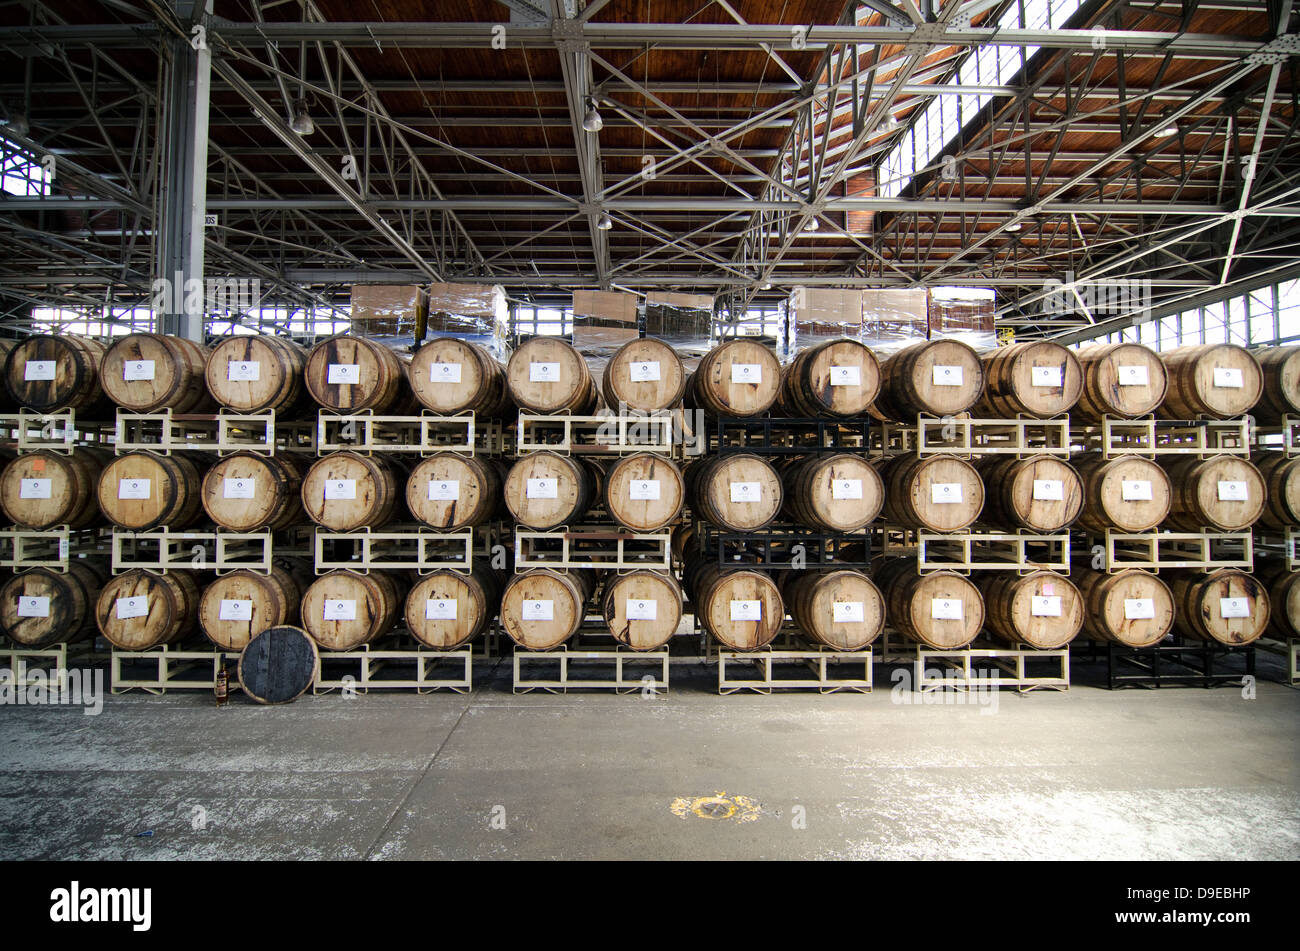 Barrels of whiskey are stacked in the St. George Distillery in Alameda, CA. Stock Photo